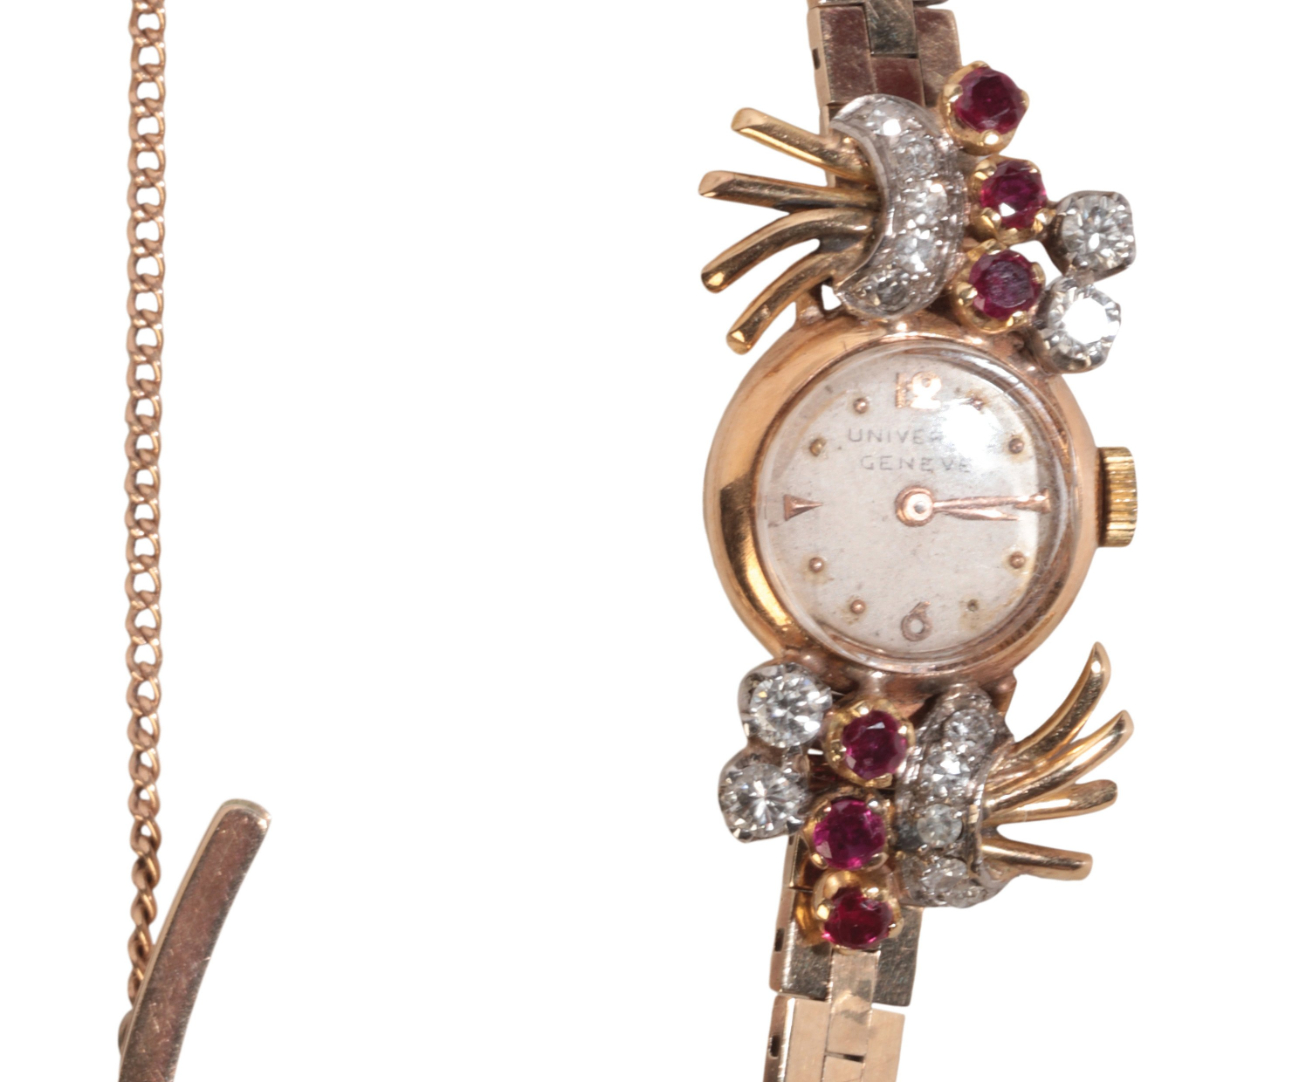 UNIVERSAL GENEVE: A LADY'S 9CT GOLD, DIAMOND, AND RUBY-SET COCKTAIL WATCH - Image 2 of 2